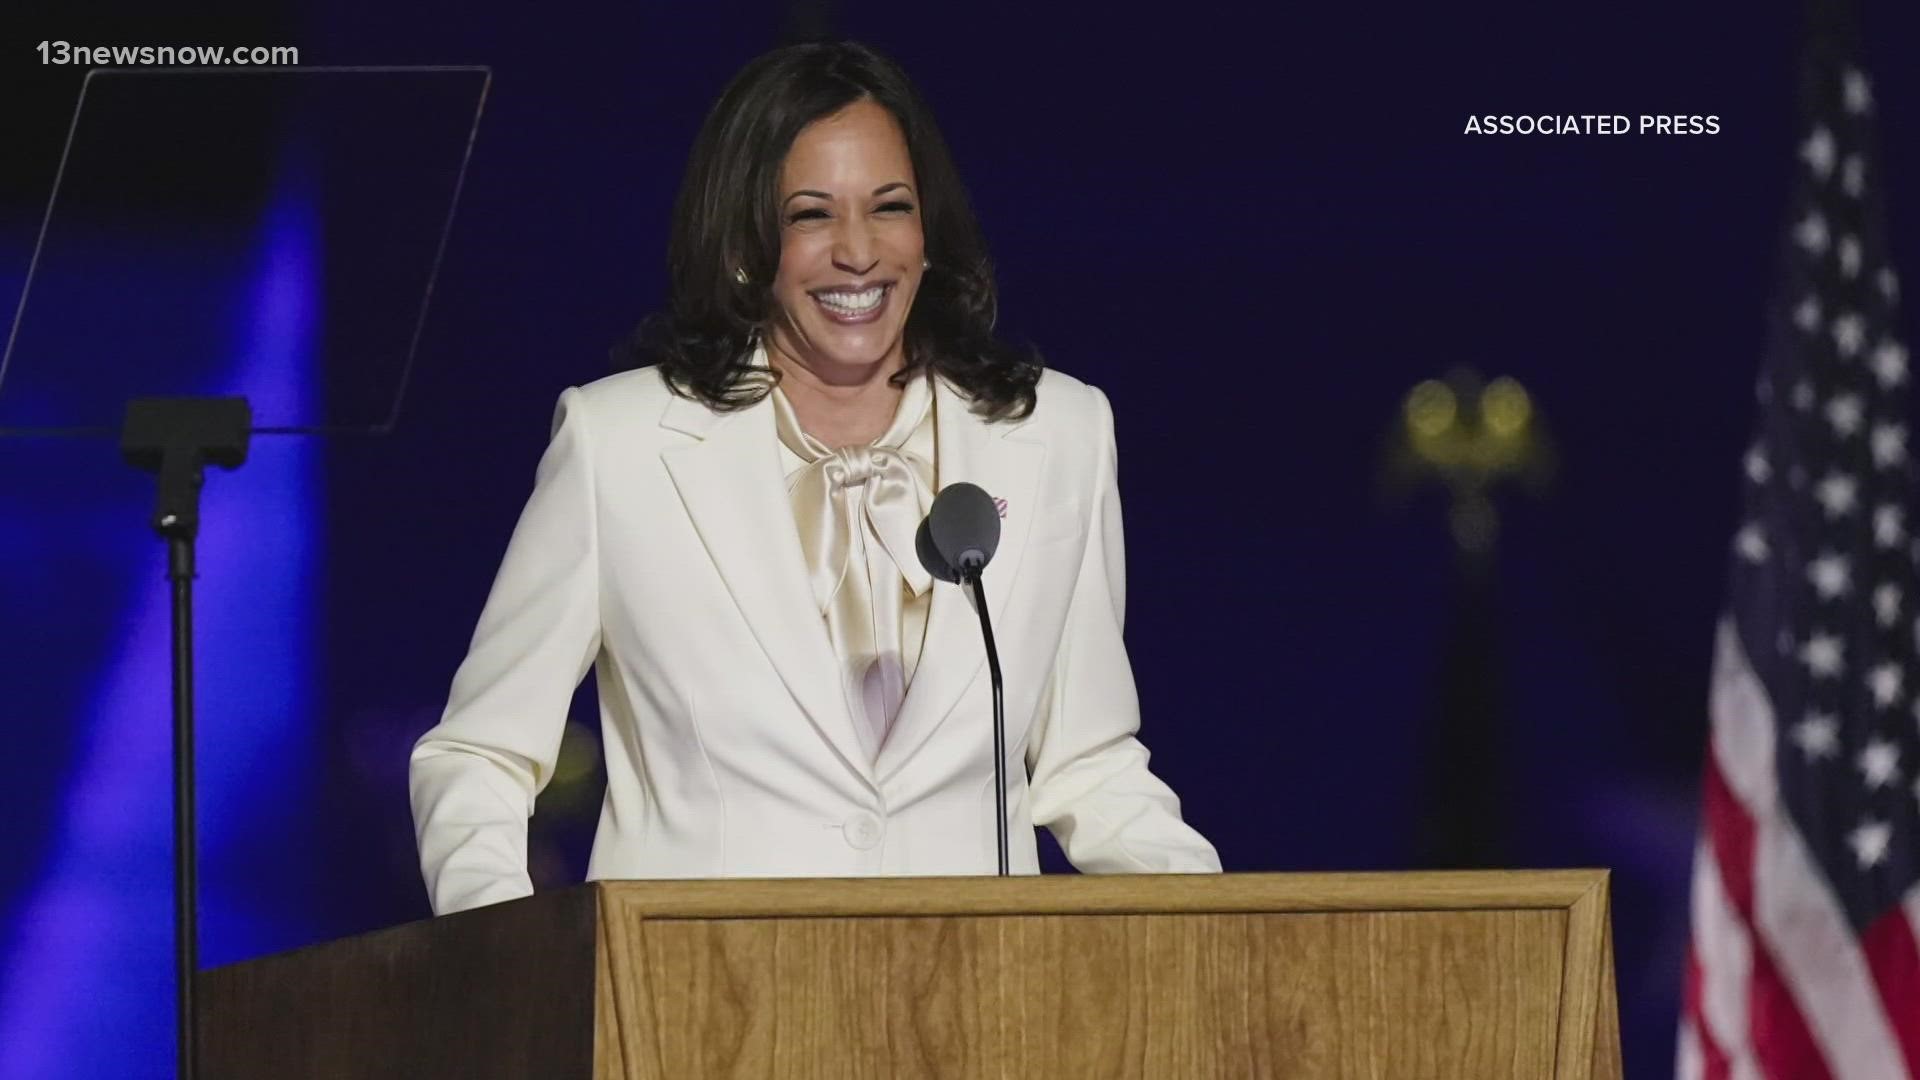 VP Kamala Harris is recognizing the contributions of HBCUs and minorities in STEM fields. She was greeted by Hampton Mayor Donnie Tuck and Rep. Elaine Luria.